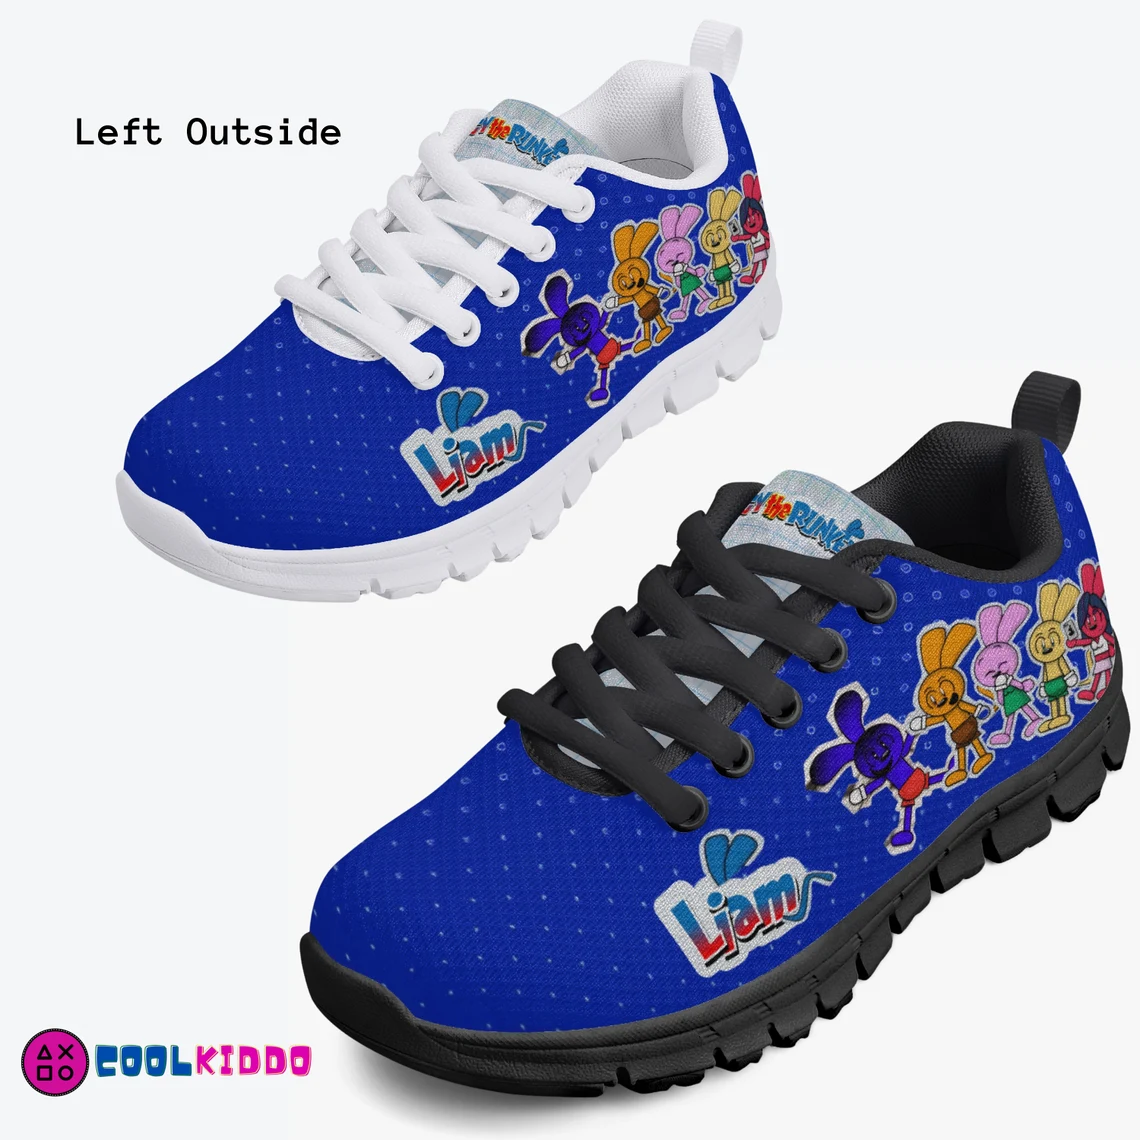 Personalized RiGGY the RUNKEY Lightweight Mesh Sneakers – Characters Printed Shoes for All Seasons Cool Kiddo 12